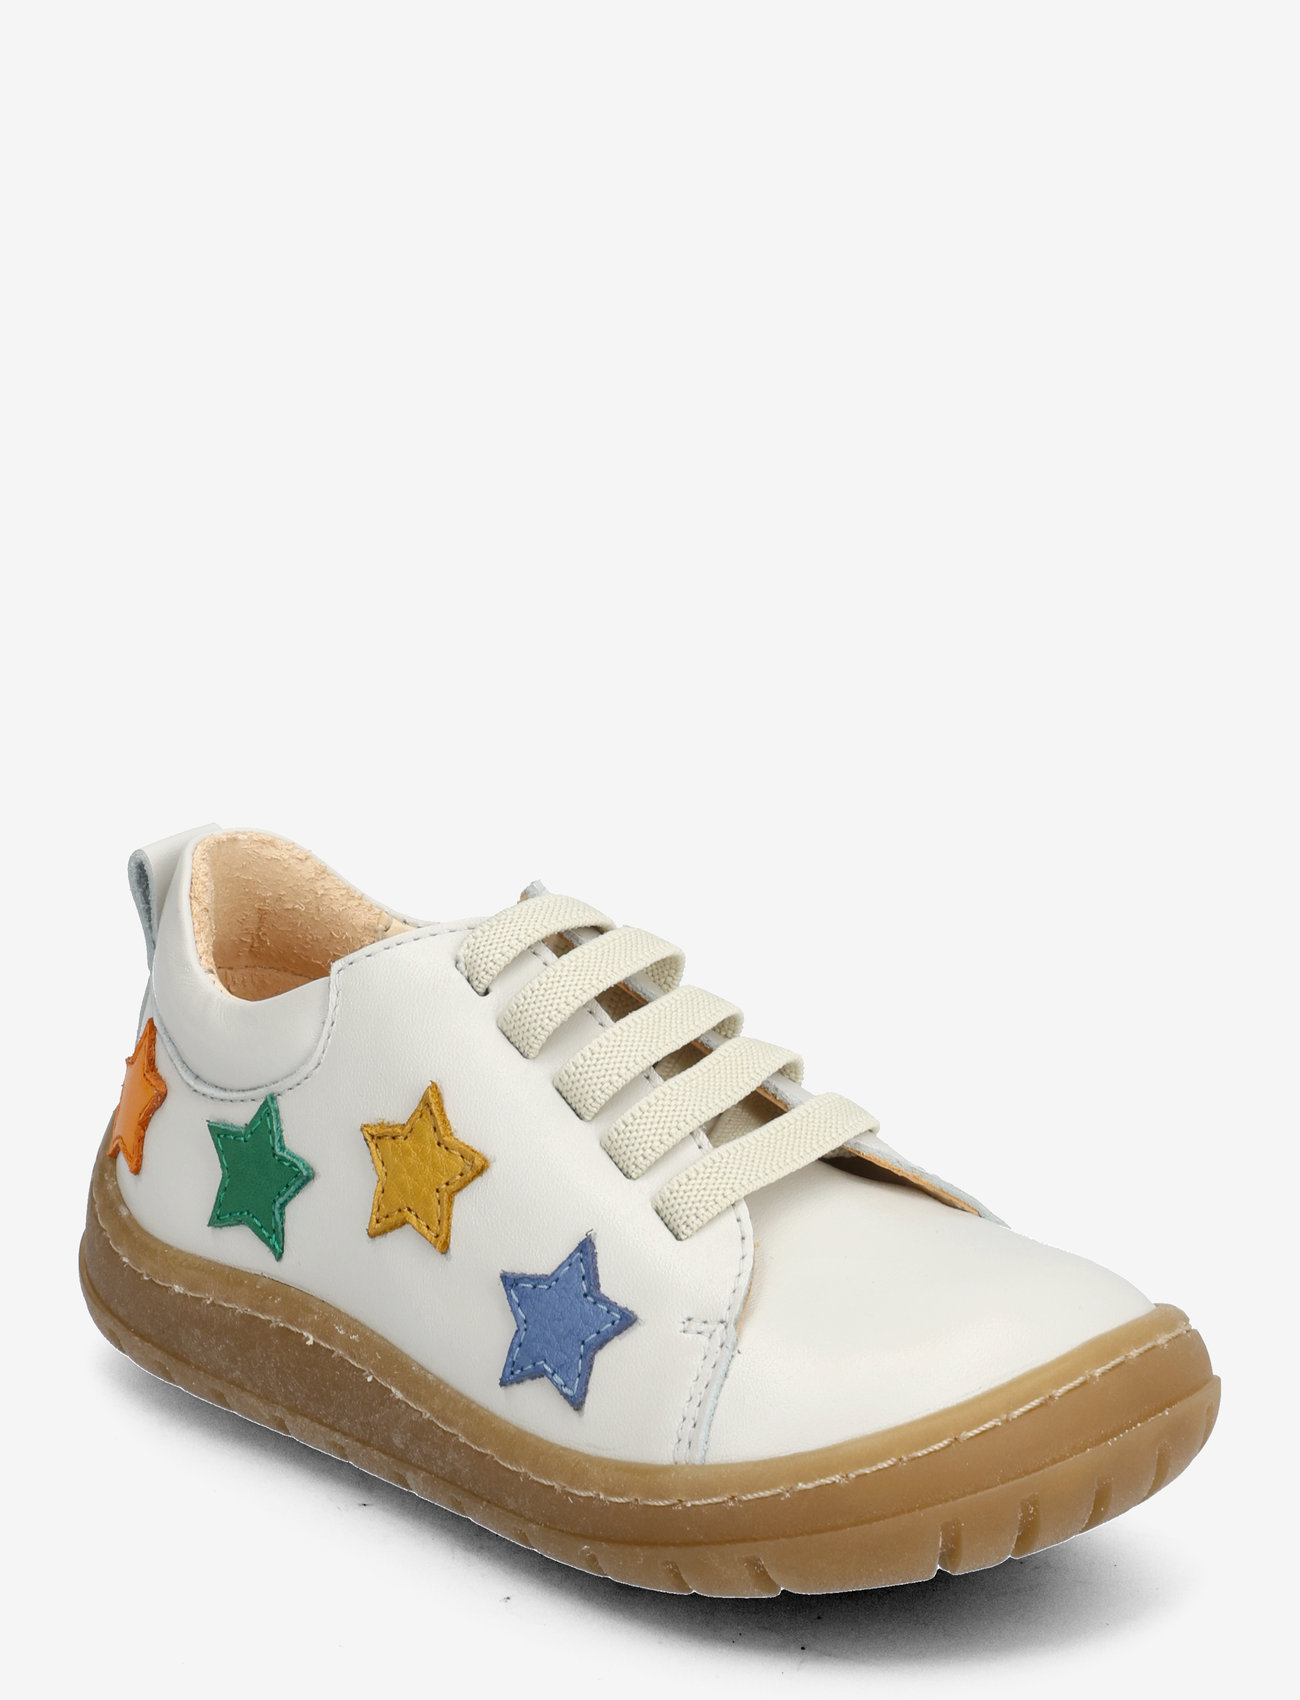 ANGULUS - Shoes - flat - with lace - gode sommertilbud - 1493/a006 off white/stars - 0